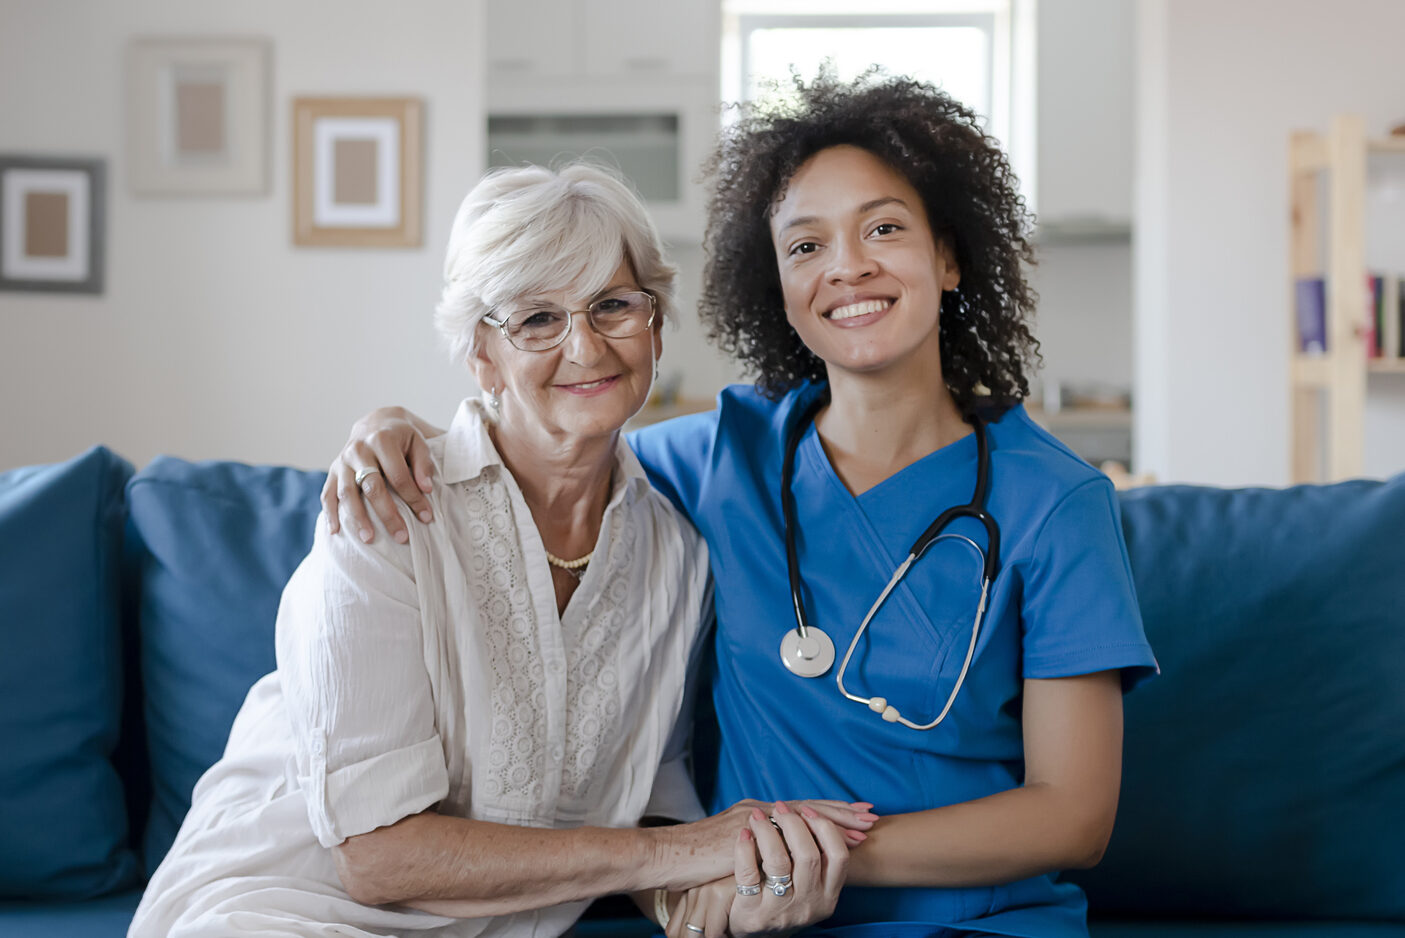 What to Ask a Franchisor About a Home Care Franchise Opportunity - Portrait of Smiling Senior Woman and Her Mixed Race Female Caregiver Together at Nursing Home. Caring Female Doctor Taking Care of a Happy, Elderly Woman